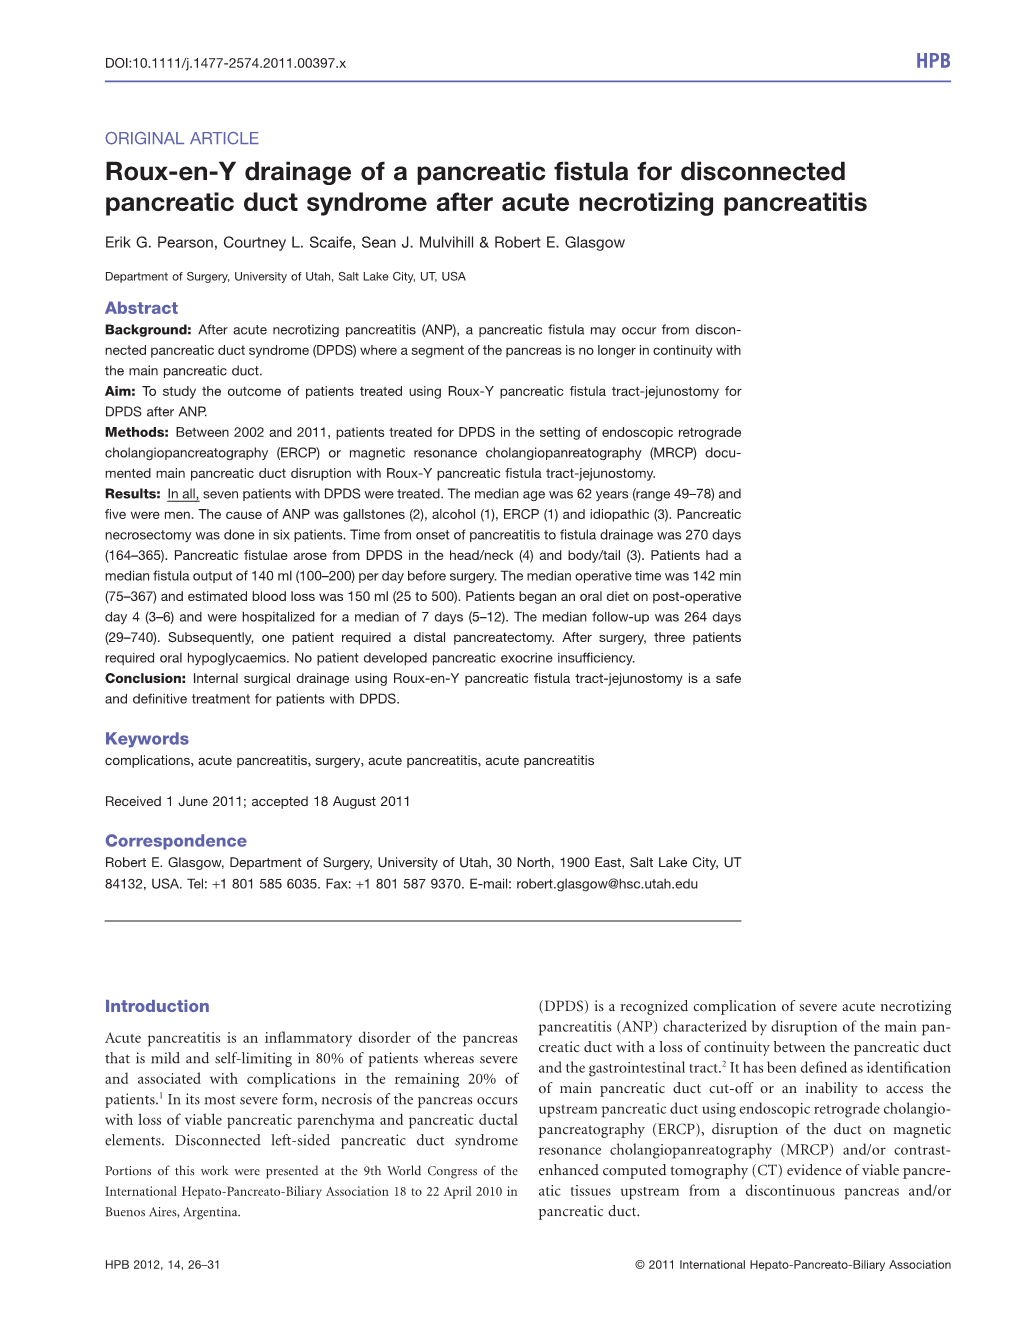 Roux-En-Y Drainage of a Pancreatic Fistula for Disconnected Pancreatic Duct Syndrome After Acute Necrotizing Pancreatitis